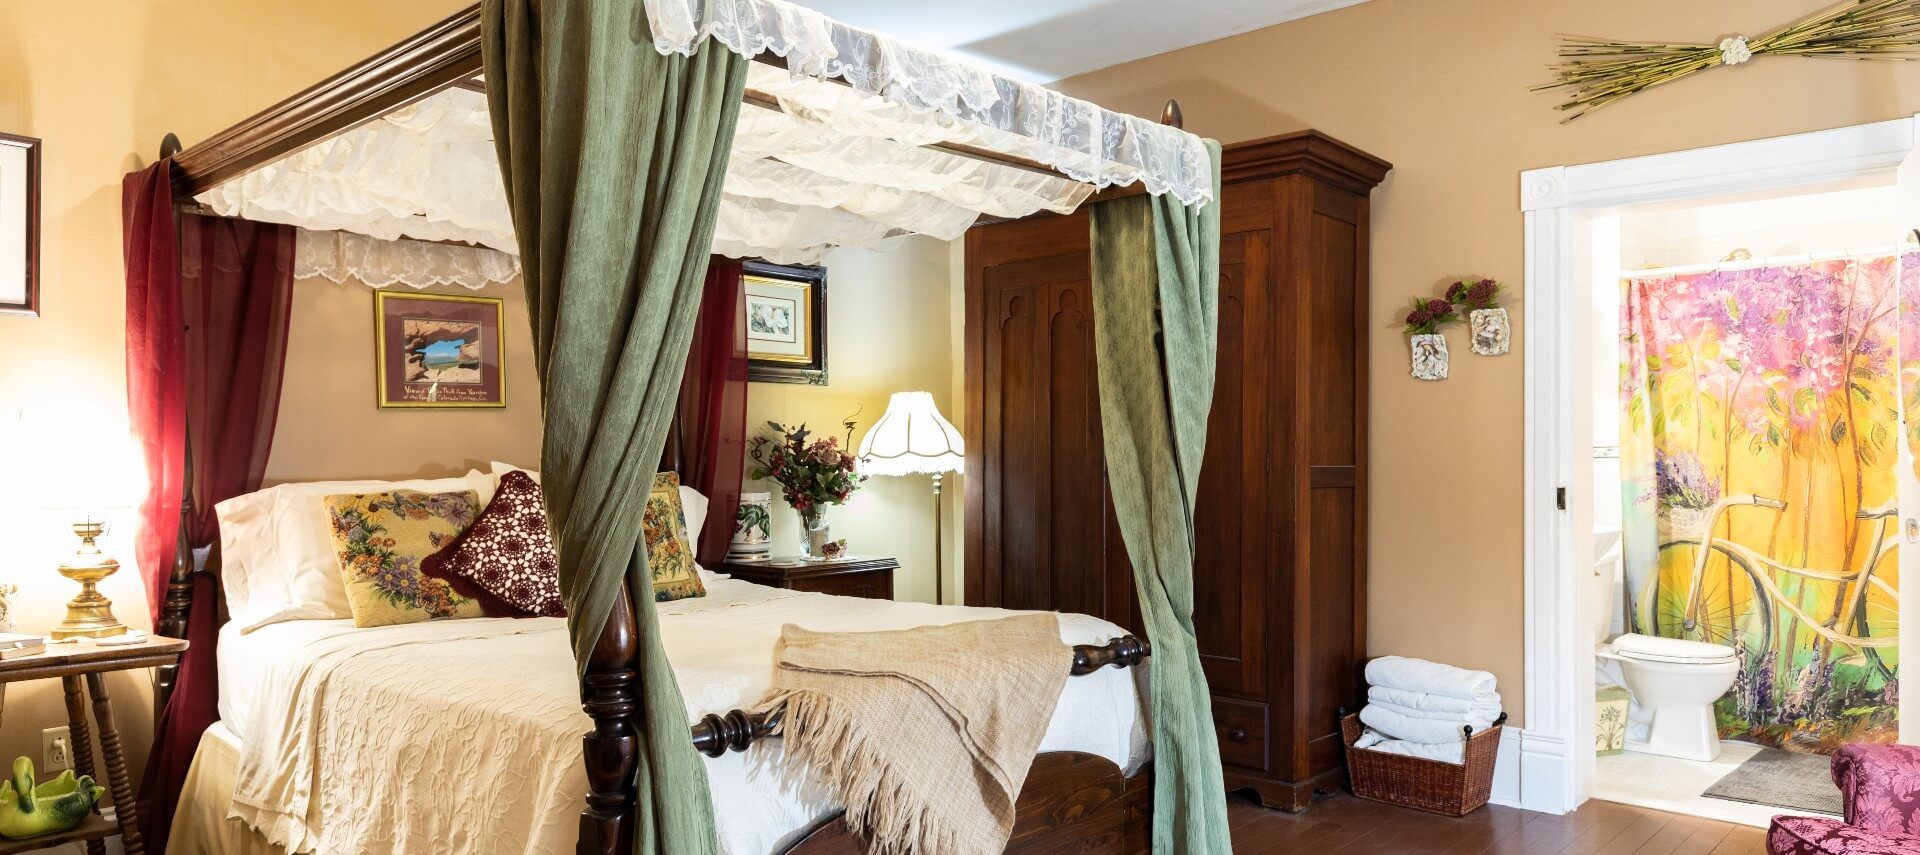 Bedroom with large four poster canopy bed. tall brown armoire and doorway into a bathroom with colorful shower curtain